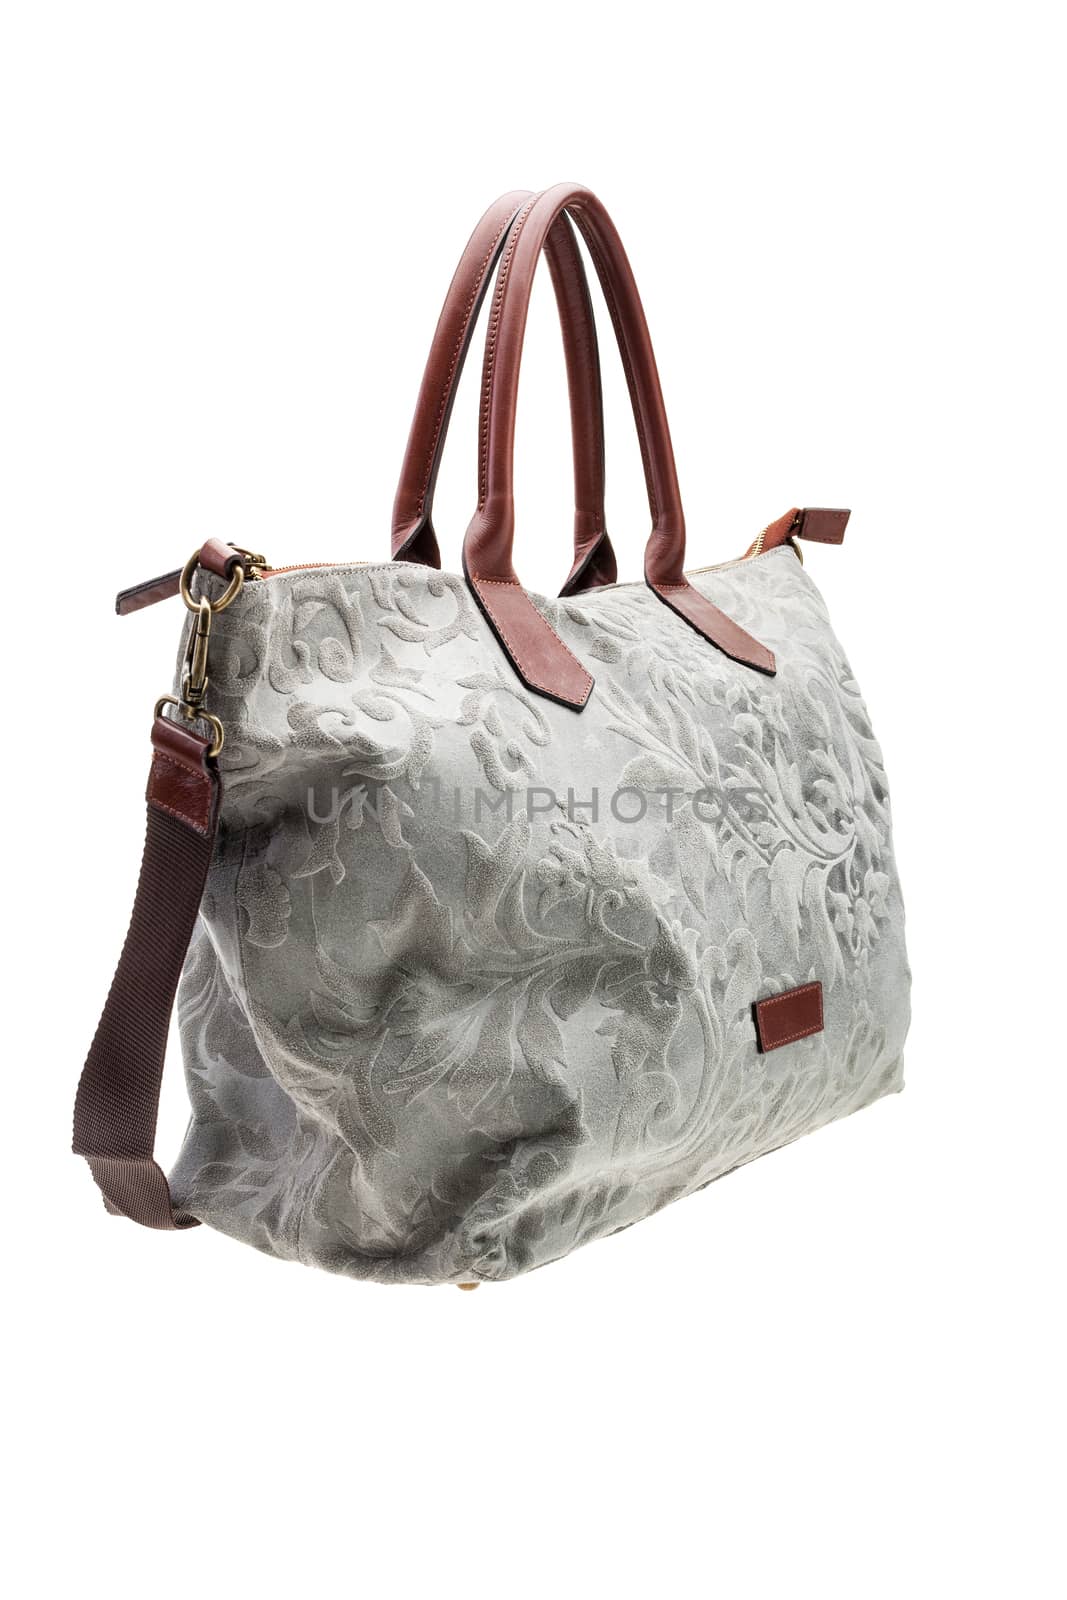 Grey patterned womens bag isolated on white background. by igor_stramyk